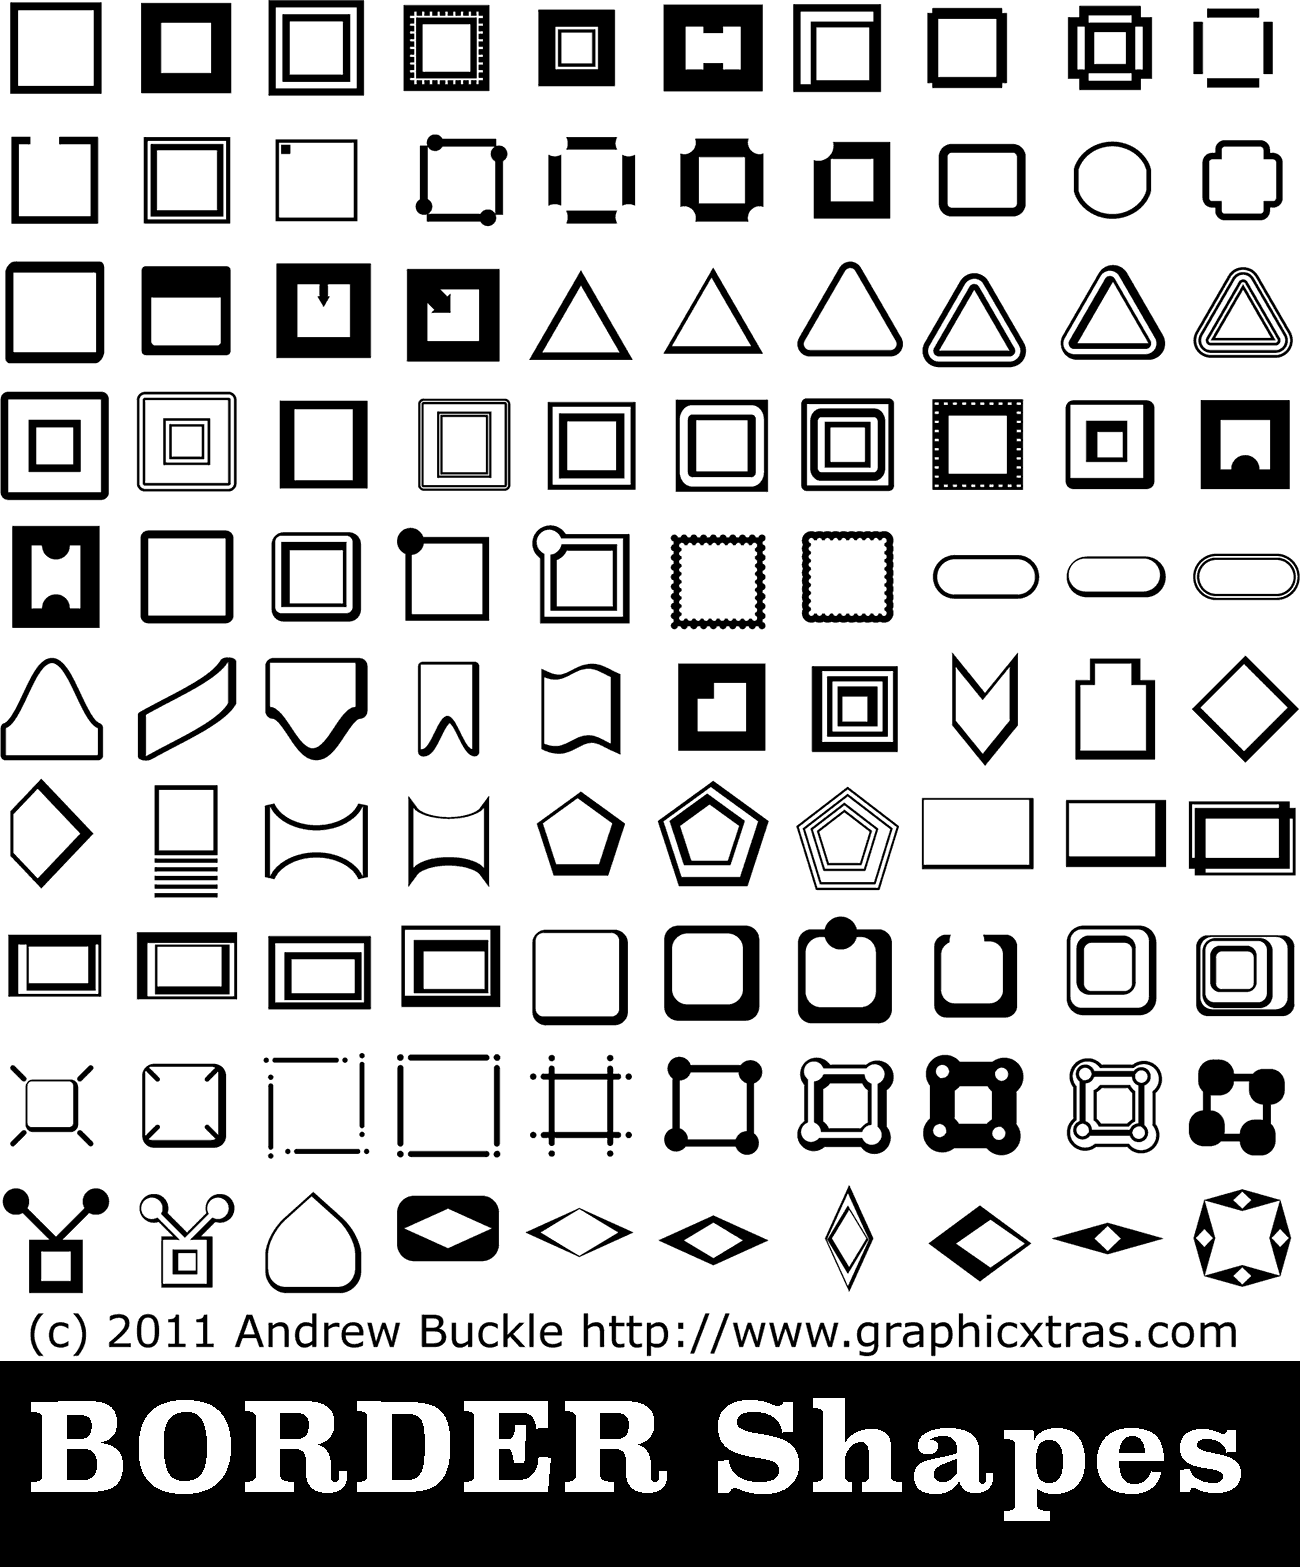 Shapes For Adobe Photoshop Free Download